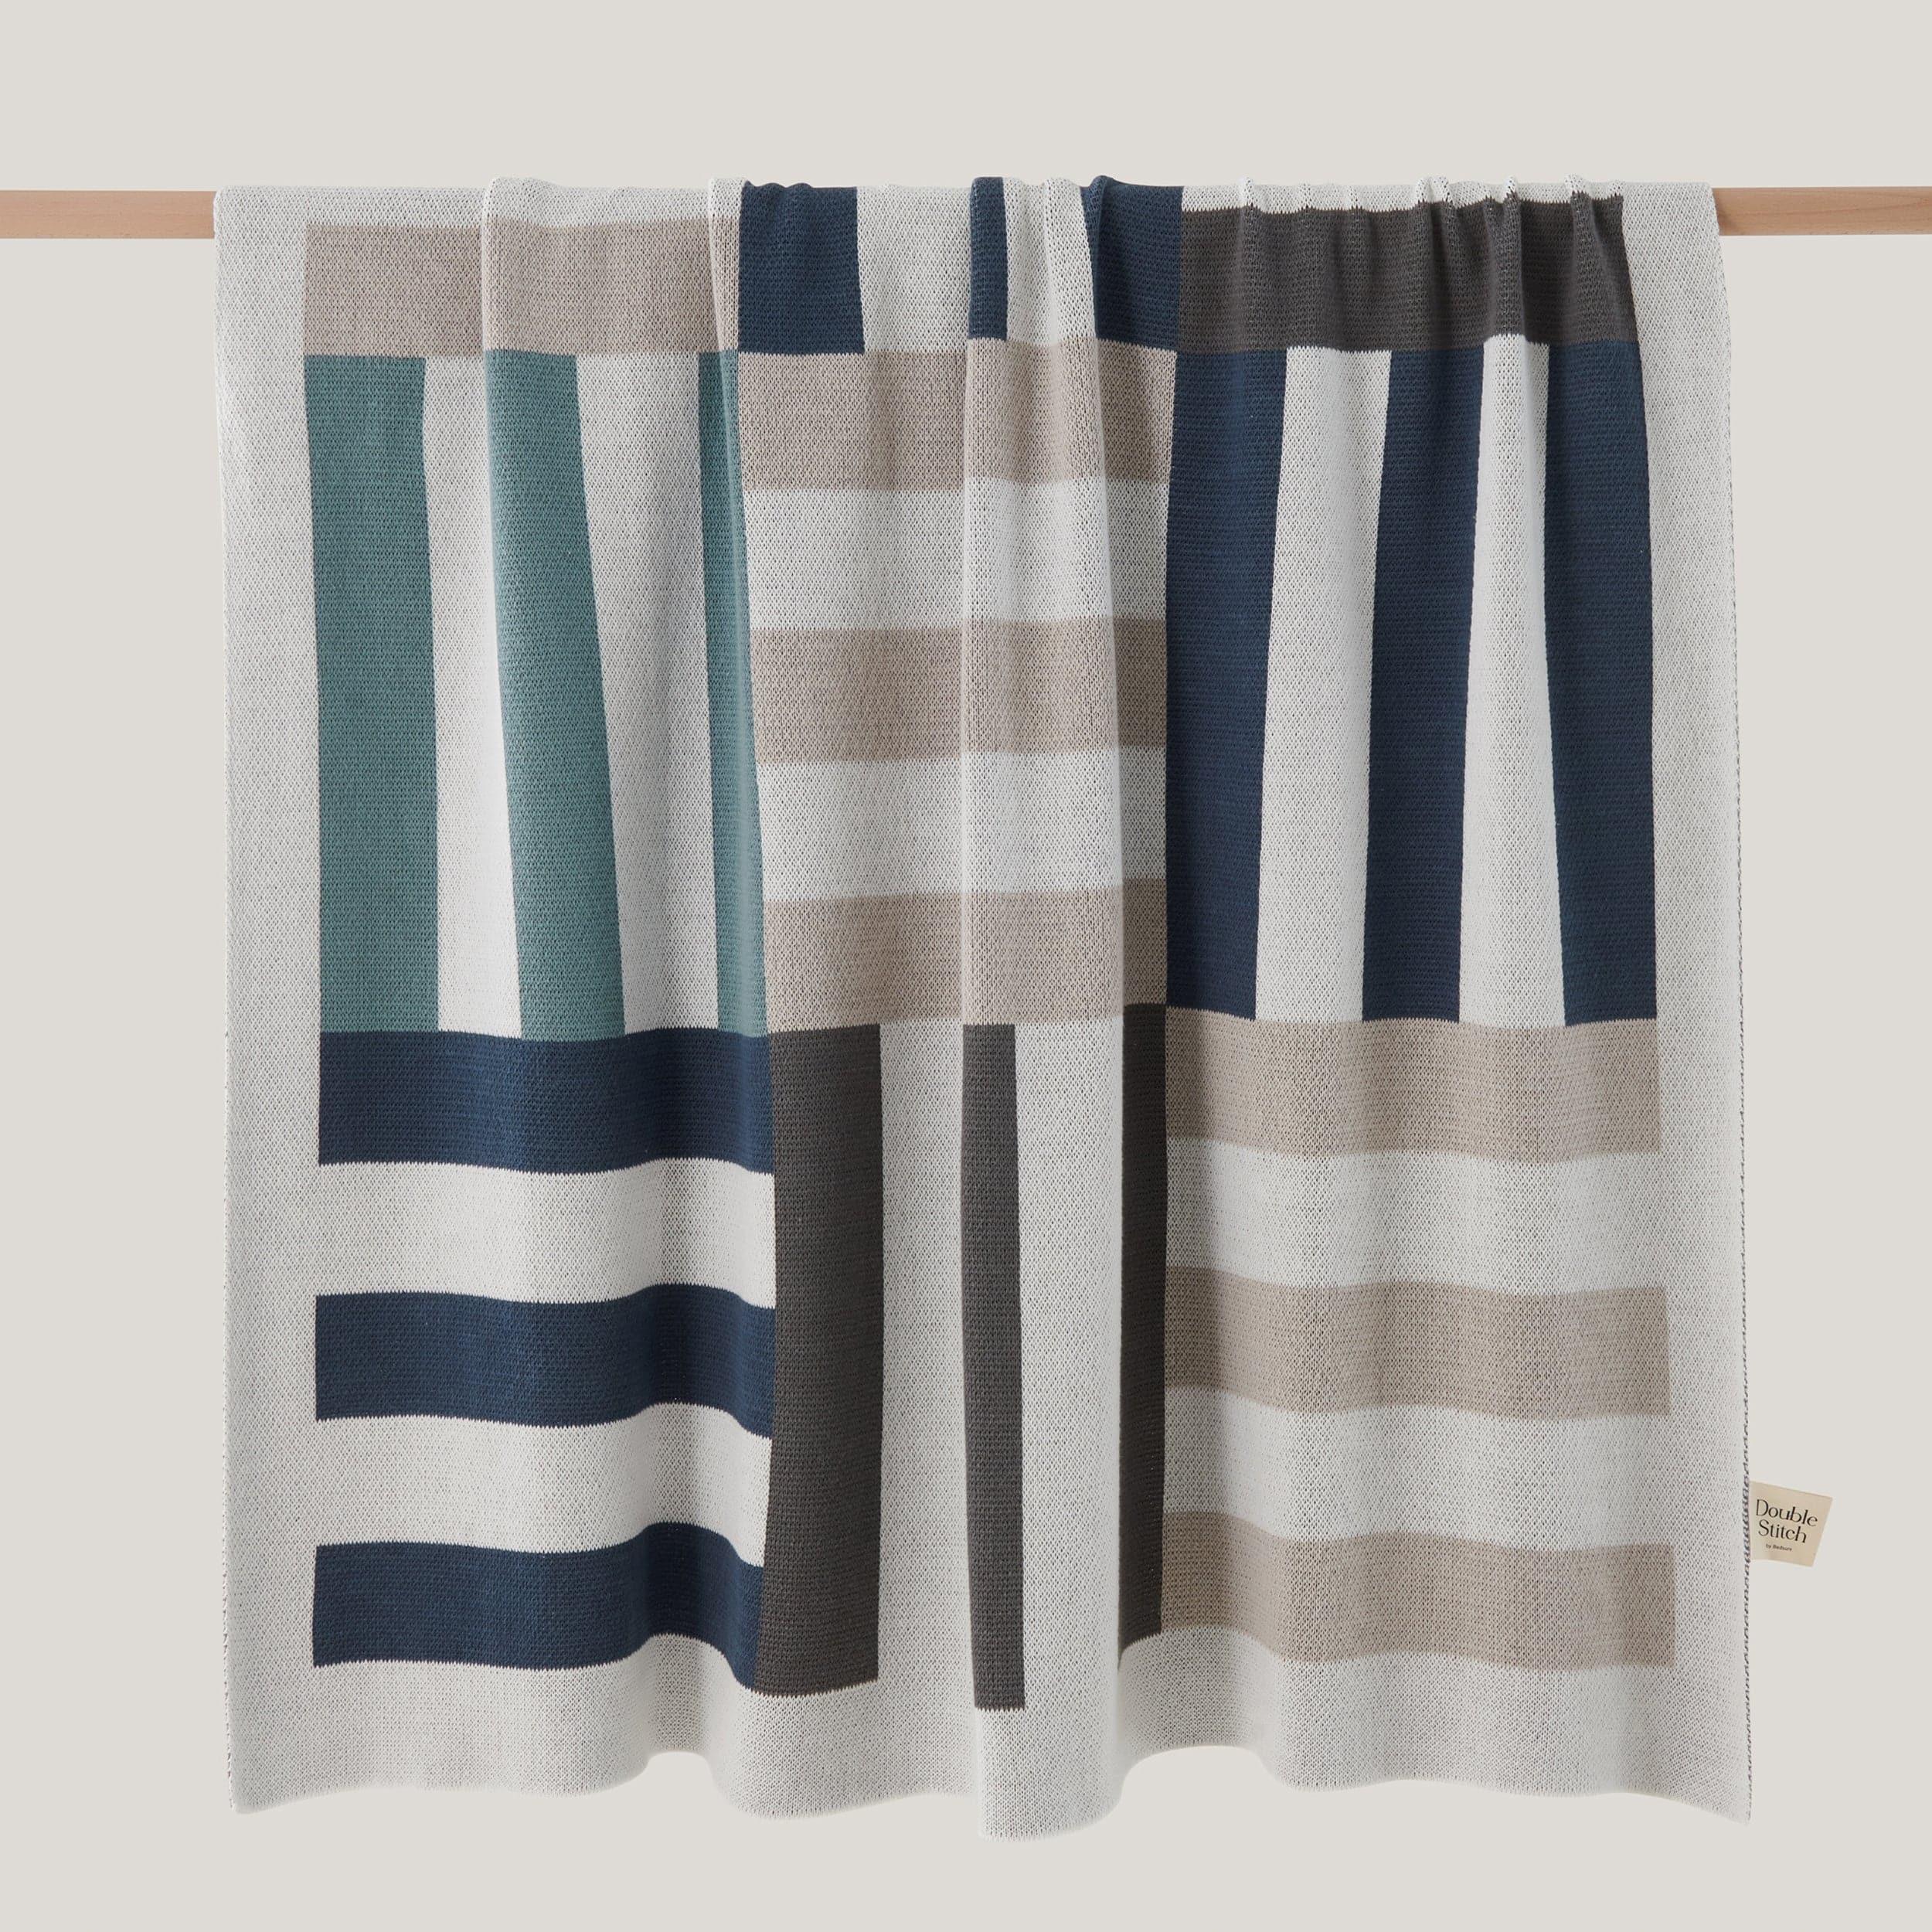 The Intarsia knit throw blanket makes a thoughtful and elegant gift for anyone who appreciates the beauty of handcrafted textiles.